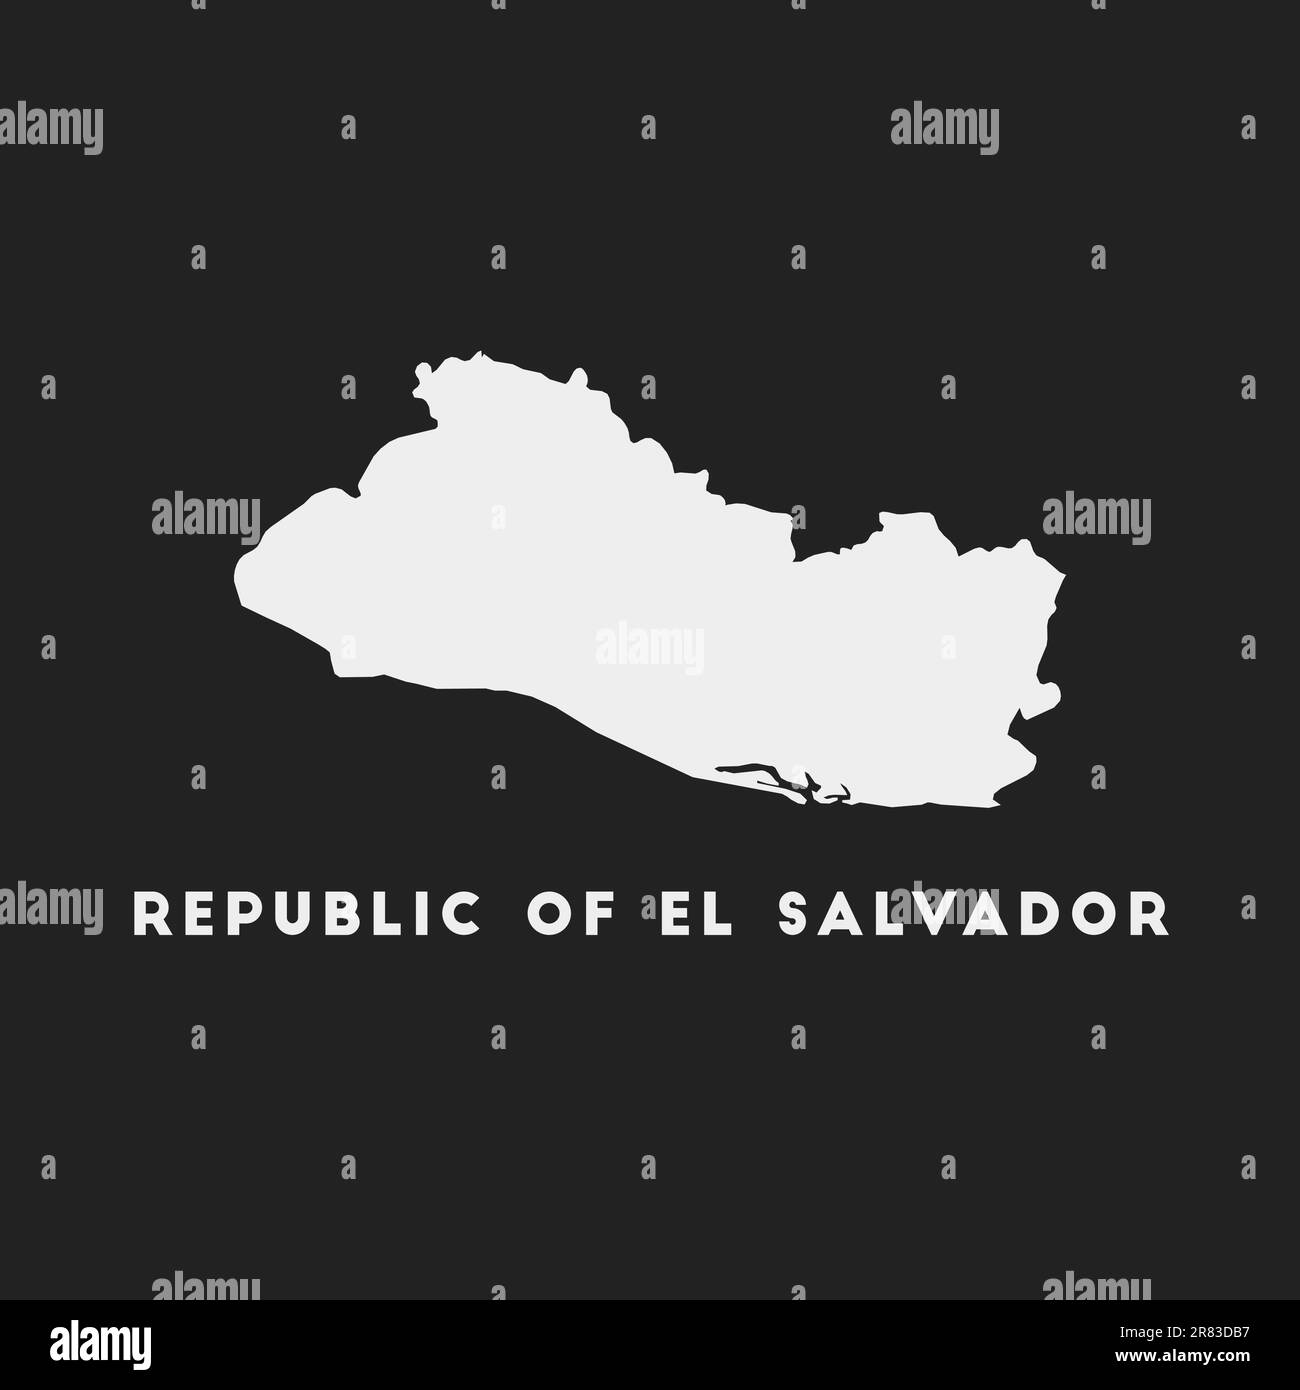 Republic of El Salvador icon. Country map on dark background. Stylish Republic of El Salvador map with country name. Vector illustration. Stock Vector